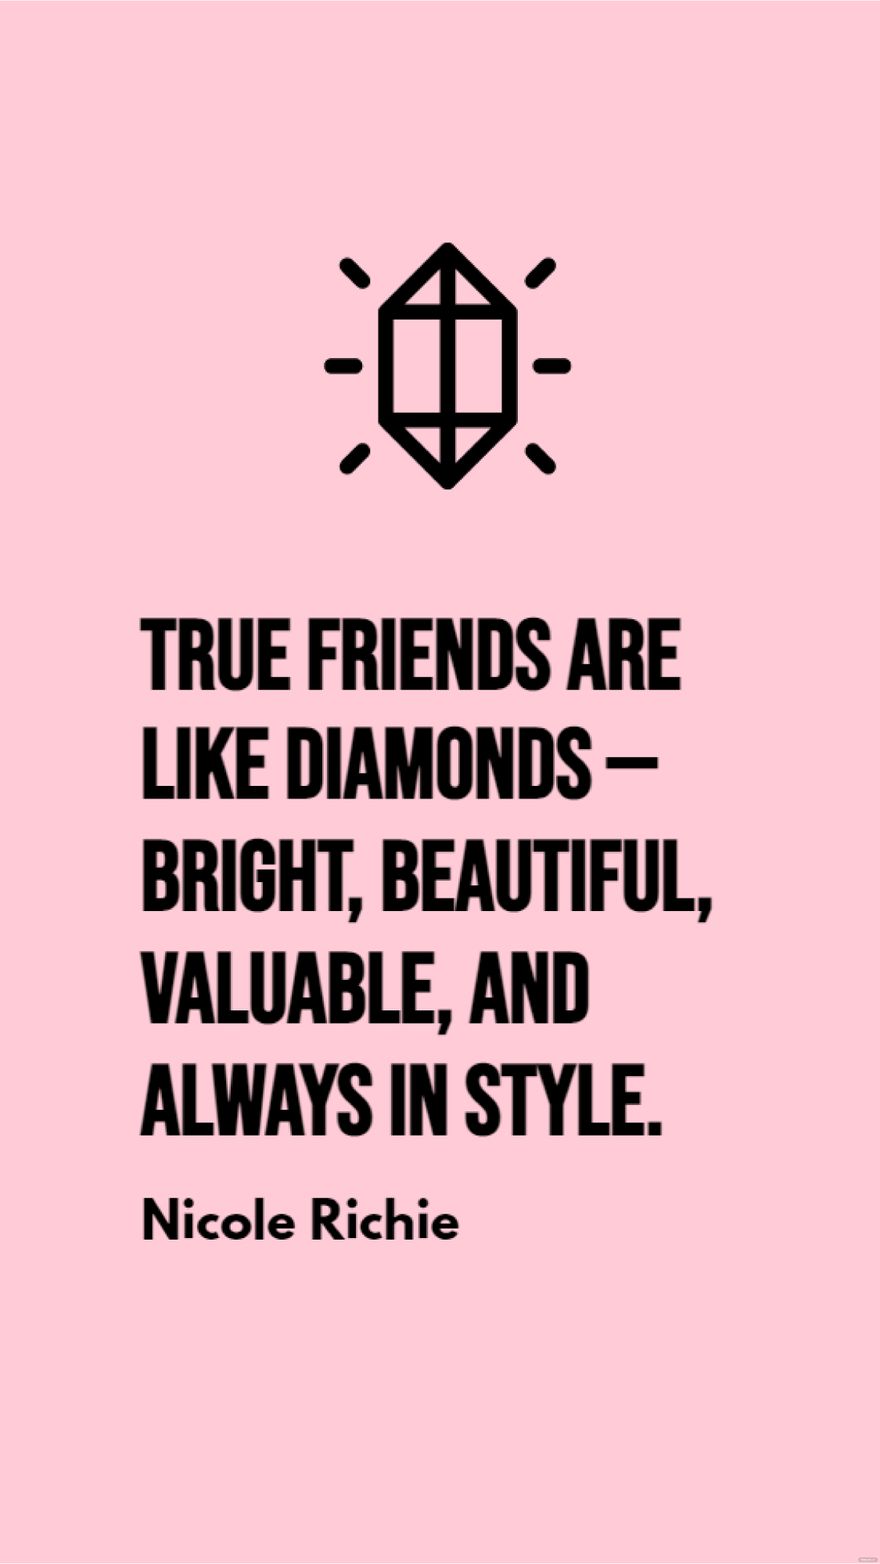 Free Nicole Richie - True friends are like diamonds — bright, beautiful, valuable, and always in style. in JPG